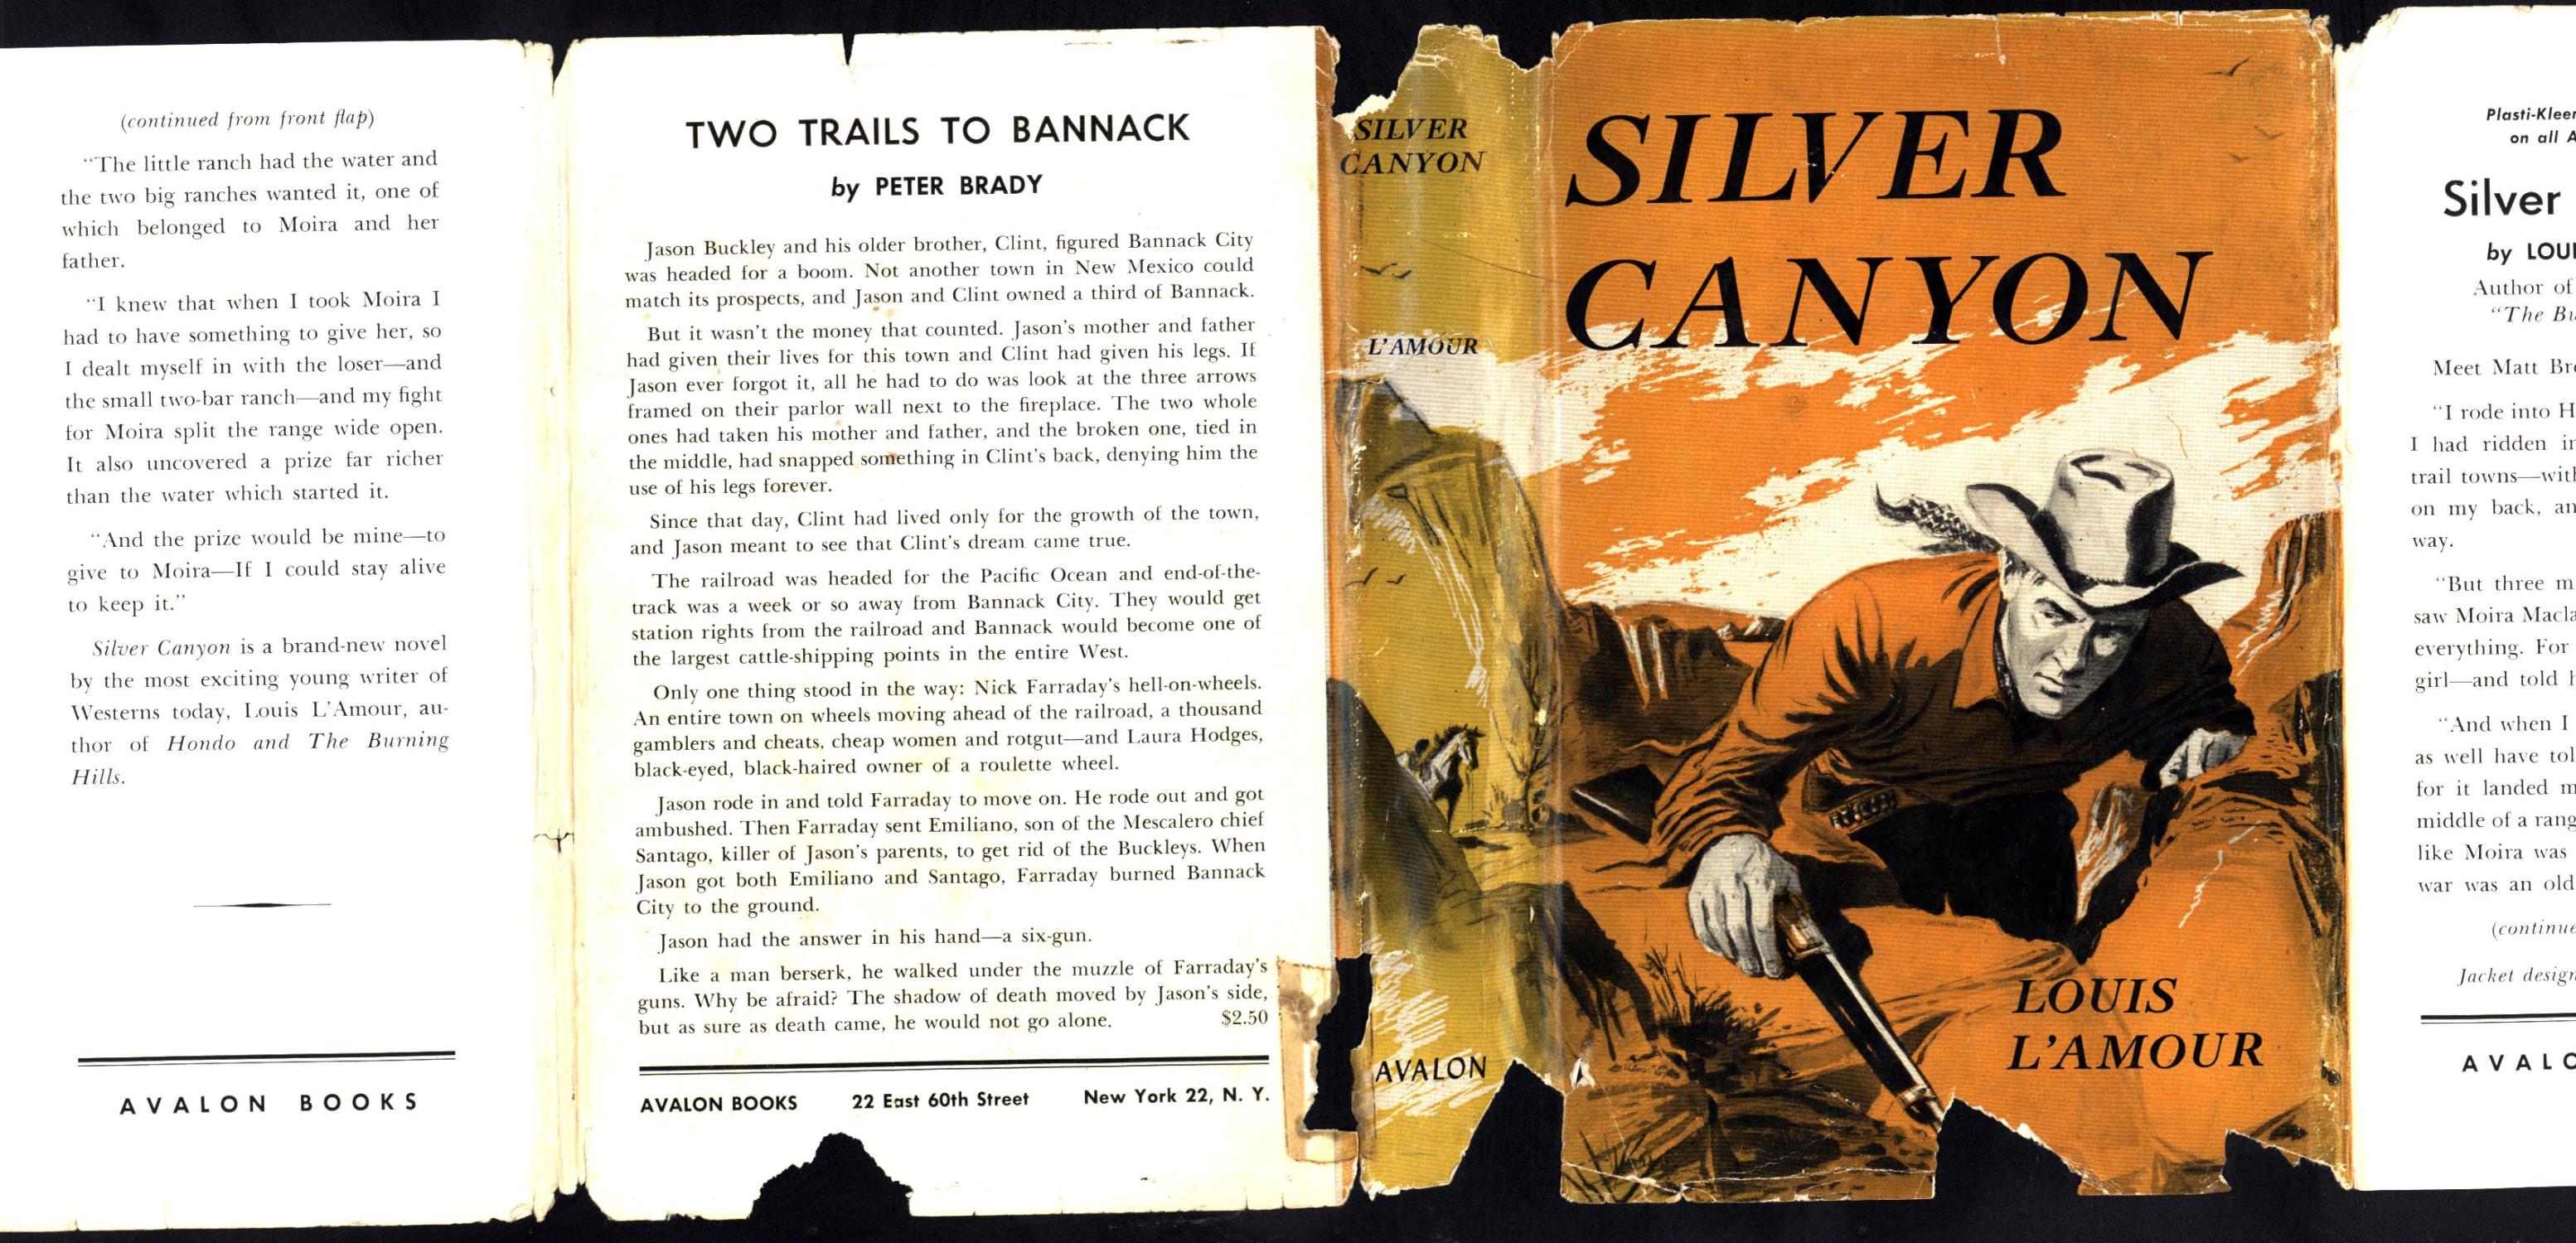 Silver Canyon by Louis L'amour From the Louis L'amour -  Sweden